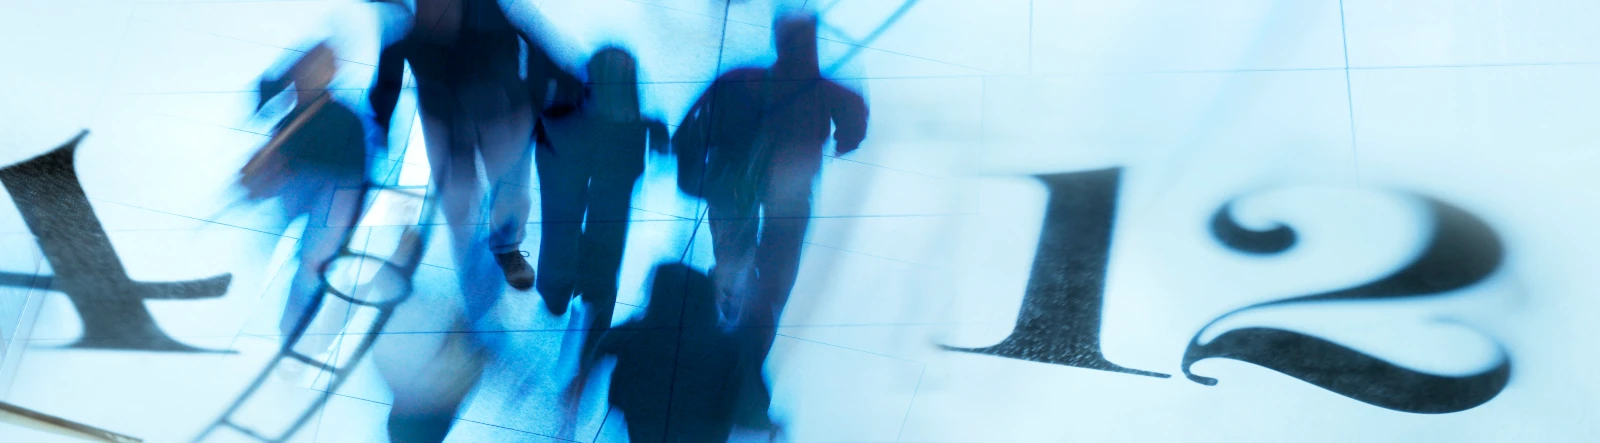 Silhouettes of people hurrying with part of a clock face overlaid